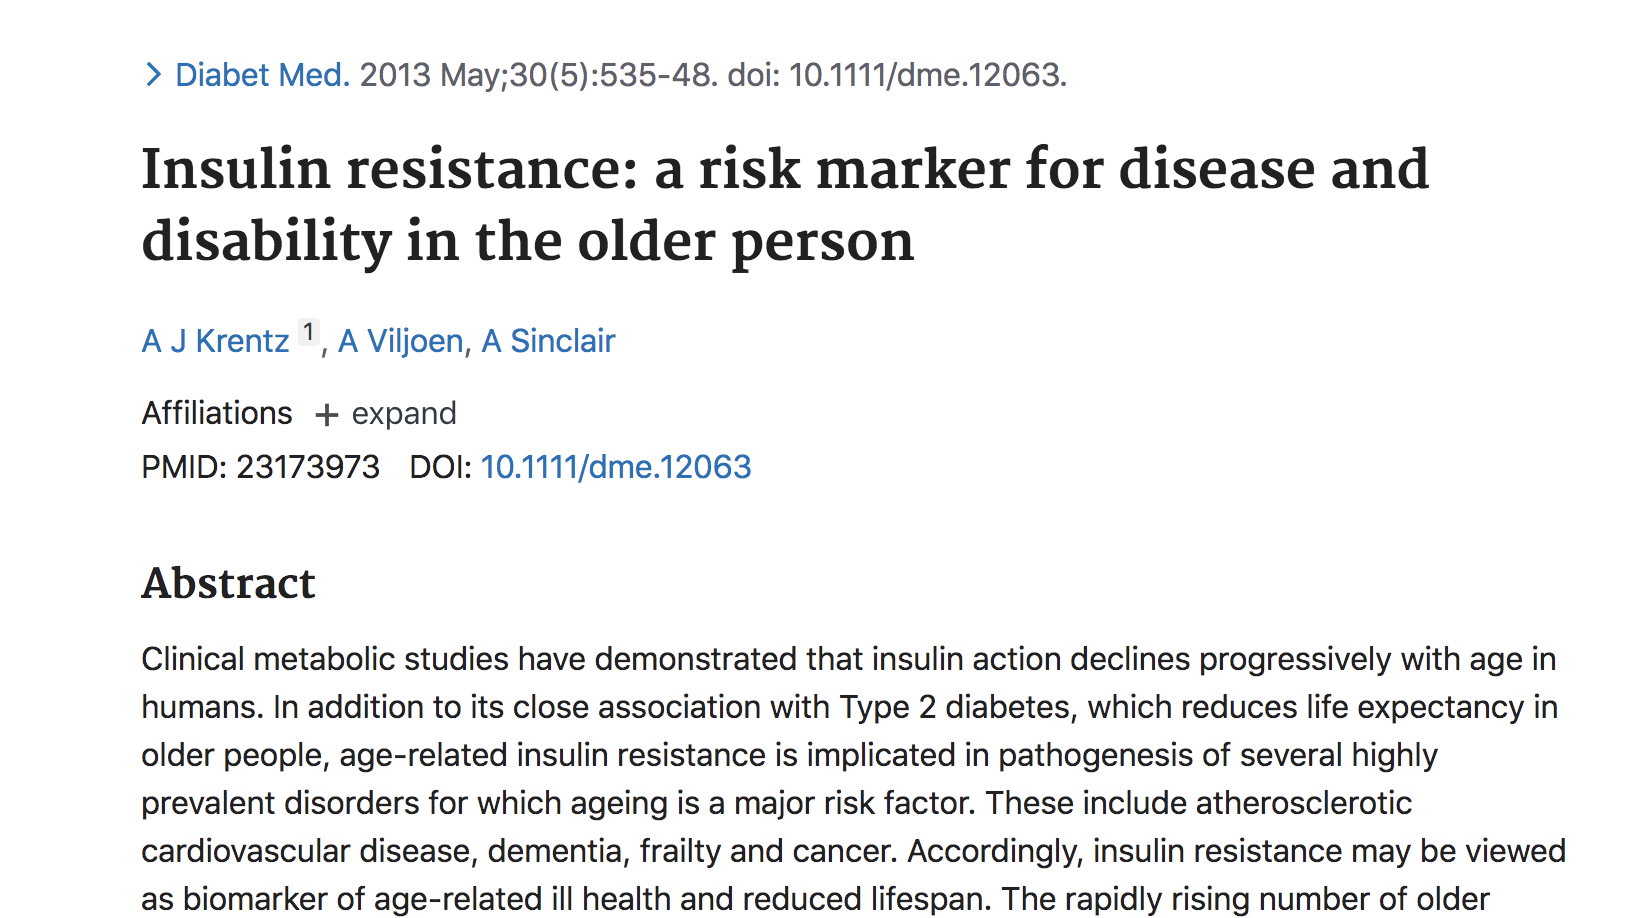 image of Insulin resistance: a risk marker for disease and disability in the older person